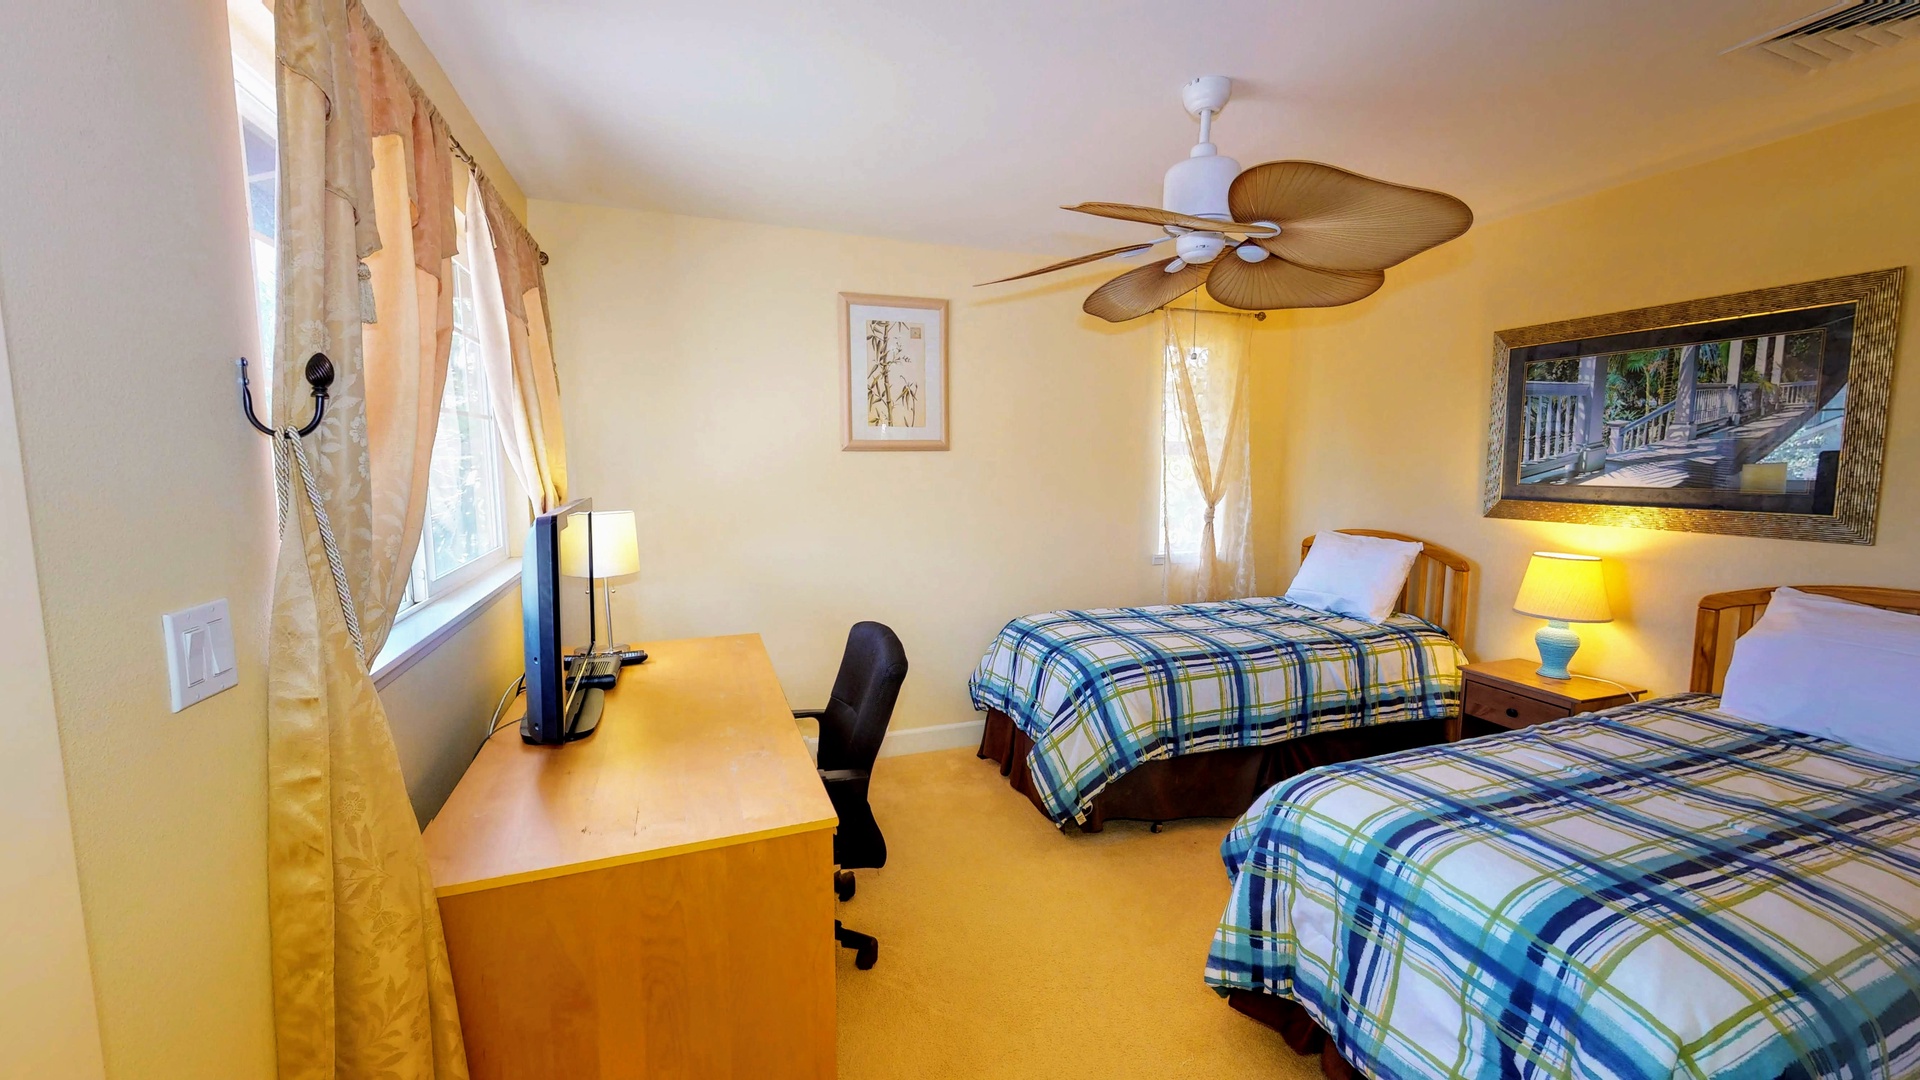 Kapolei Vacation Rentals, Ko Olina Kai 1029B - The second guest bedroom with twin beds, a desk and TV.